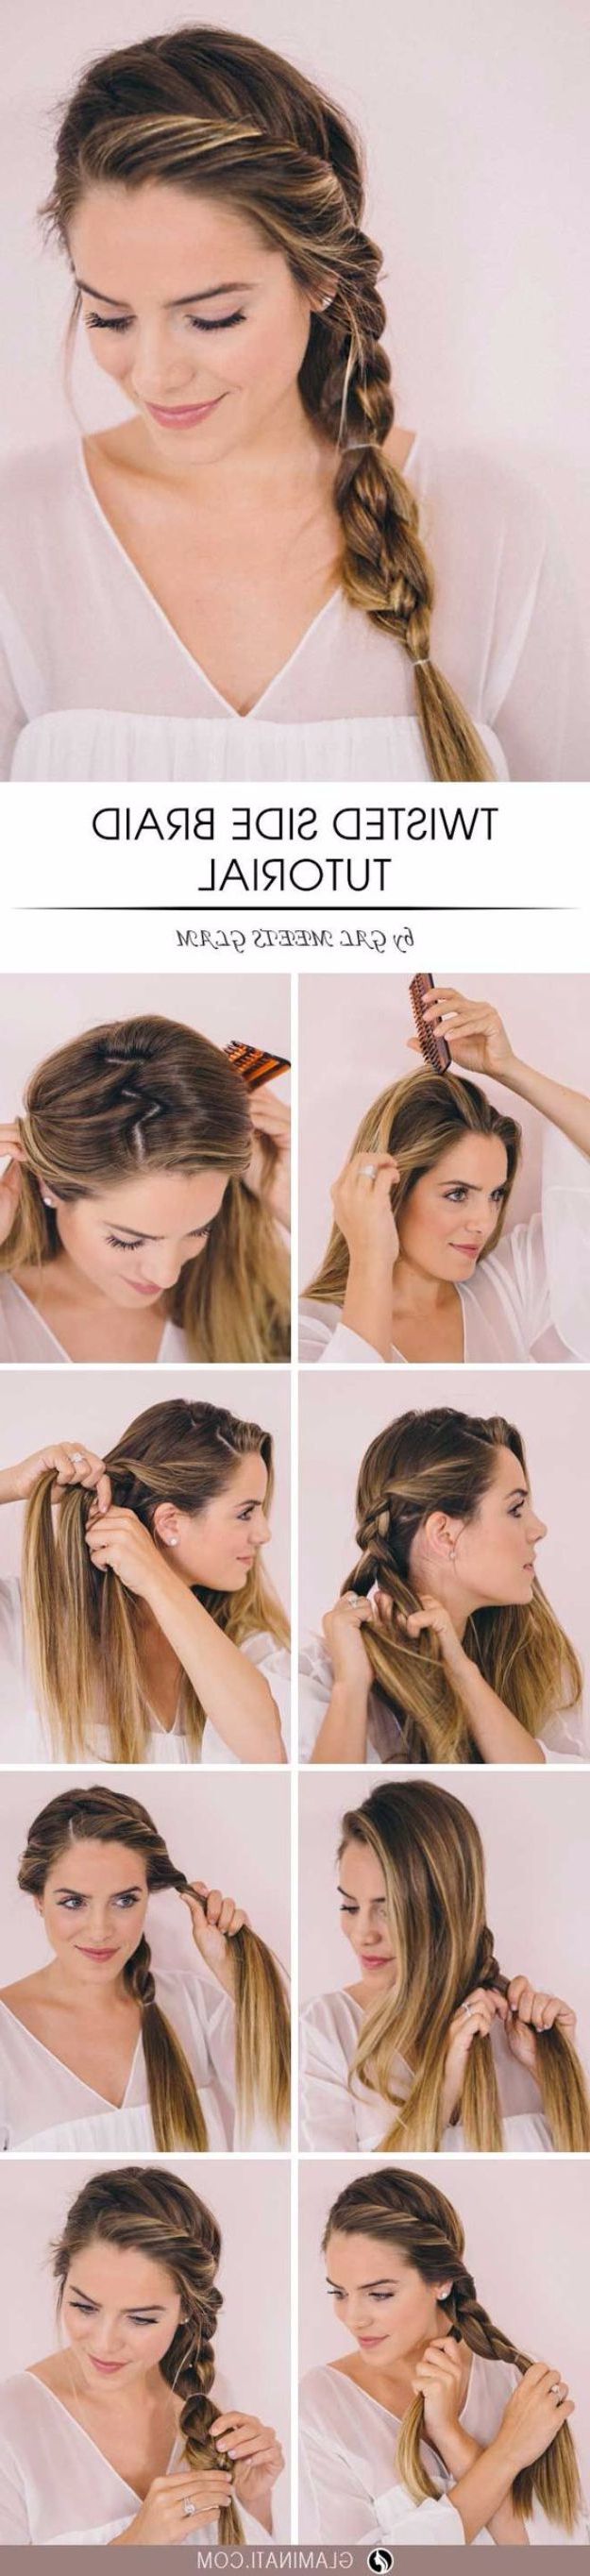 31 Cute And Easy Braids For Back To School In Most Recently Released Side Rope Braid Hairstyles For Long Hair (View 8 of 20)